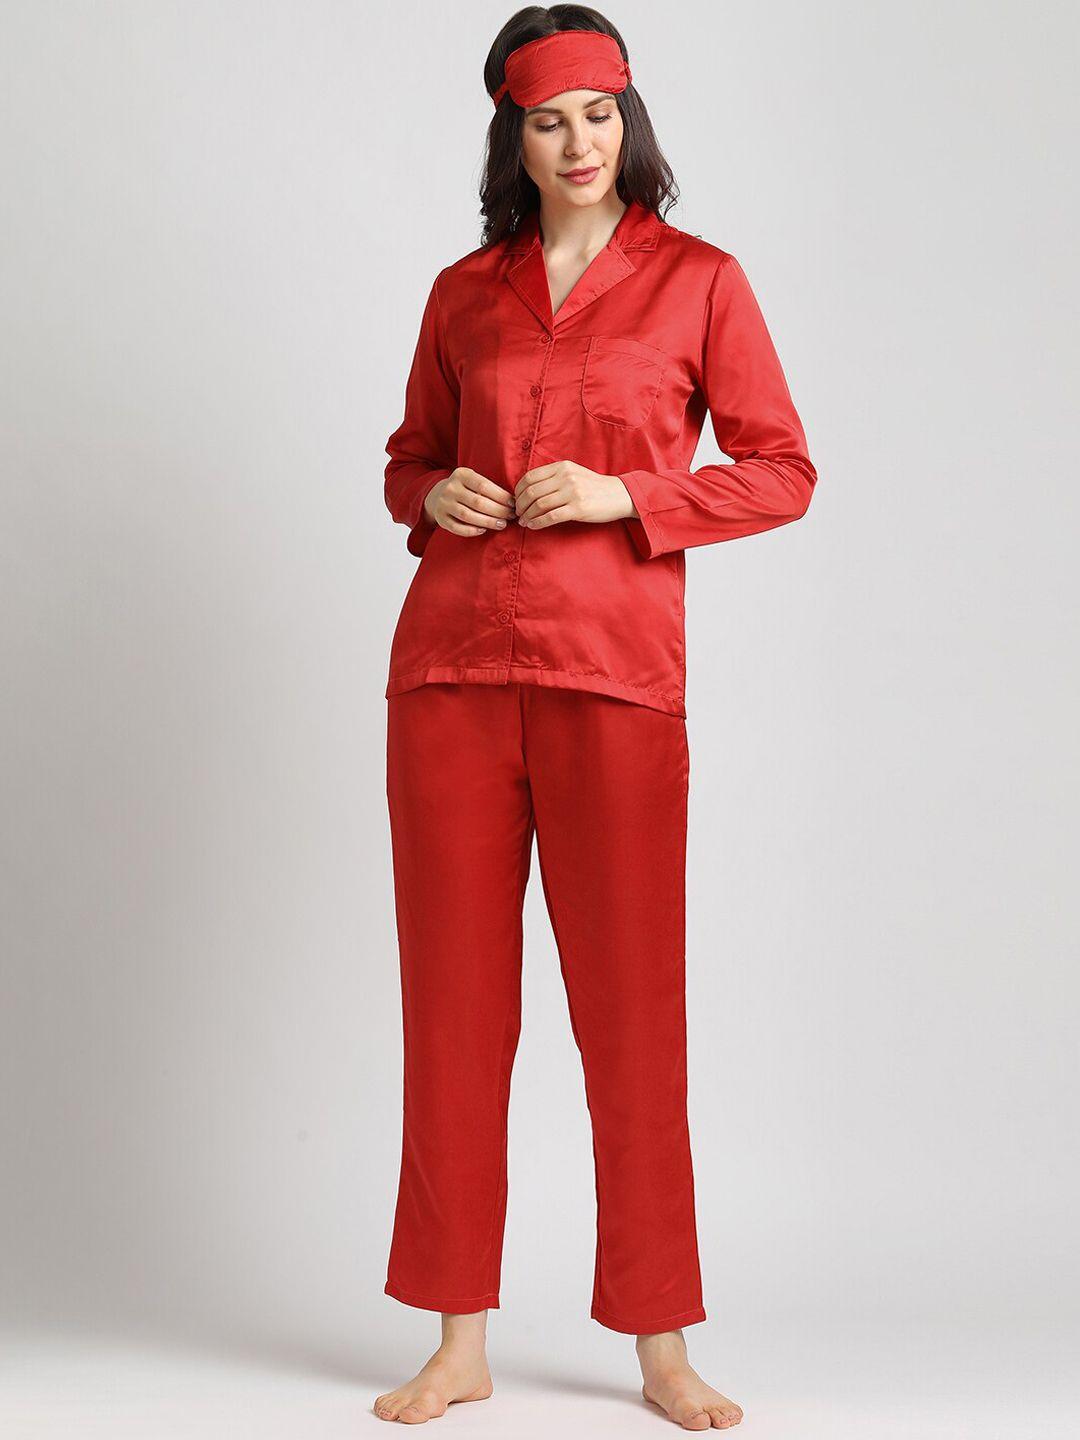 drape in vogue women red solid pyjamas set with eye mask